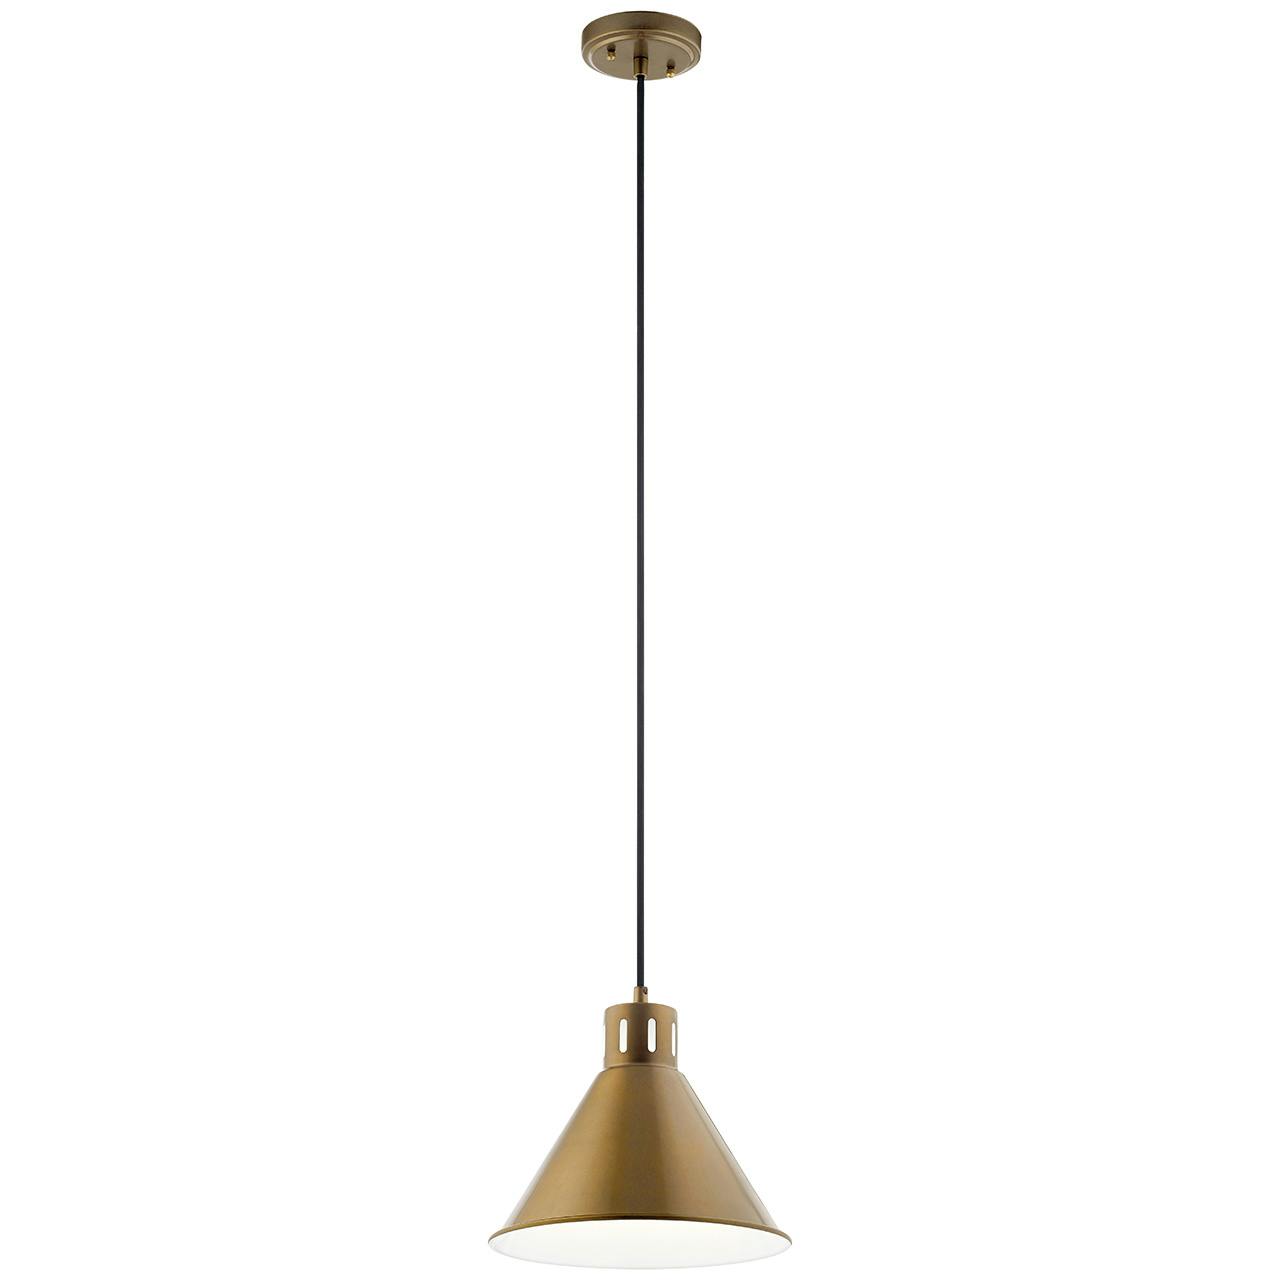 Zailey 9.5" 1 Light Pendant in Brass on a white background